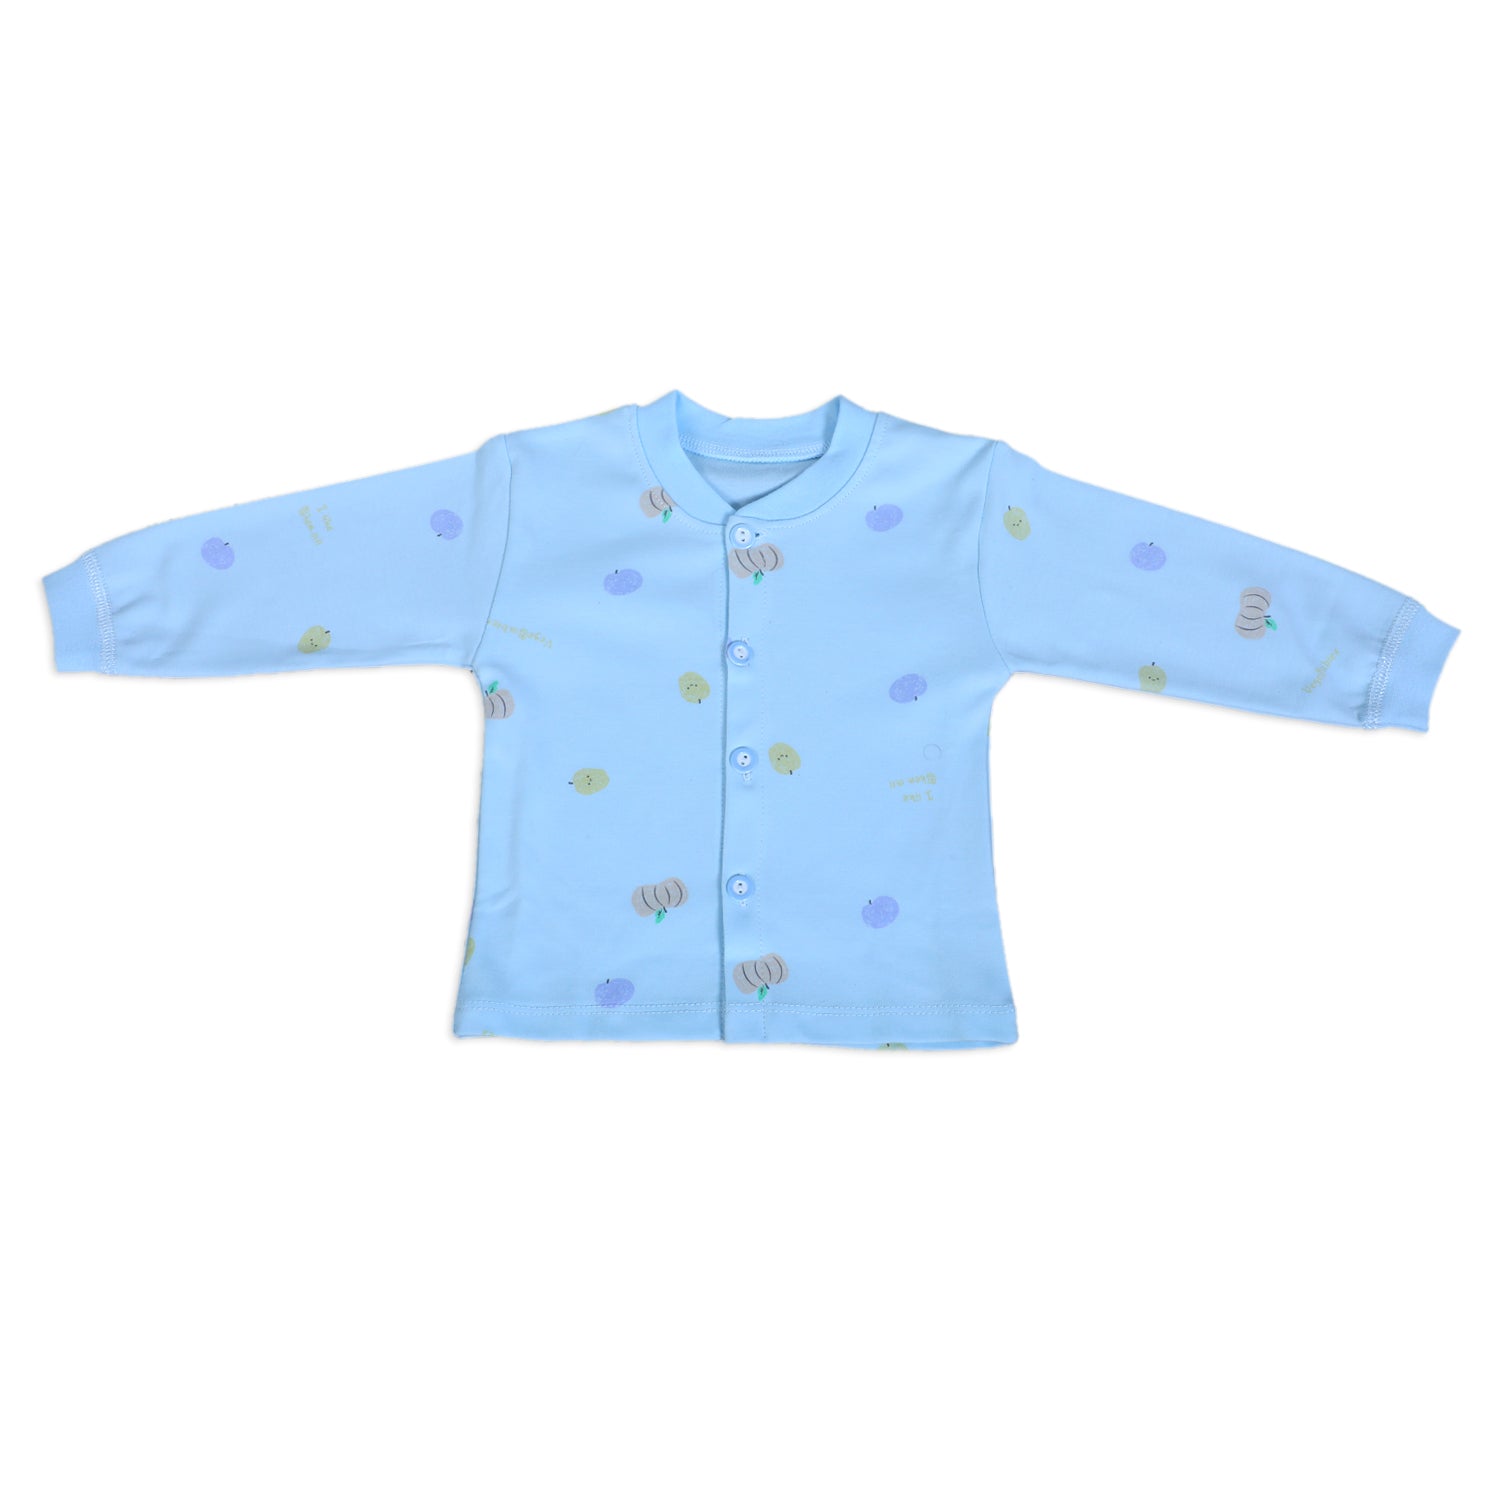 Fruitilicious Full Sleeves 2 Piece Buttoned Pyjama Set Night Suit - Blue - Baby Moo